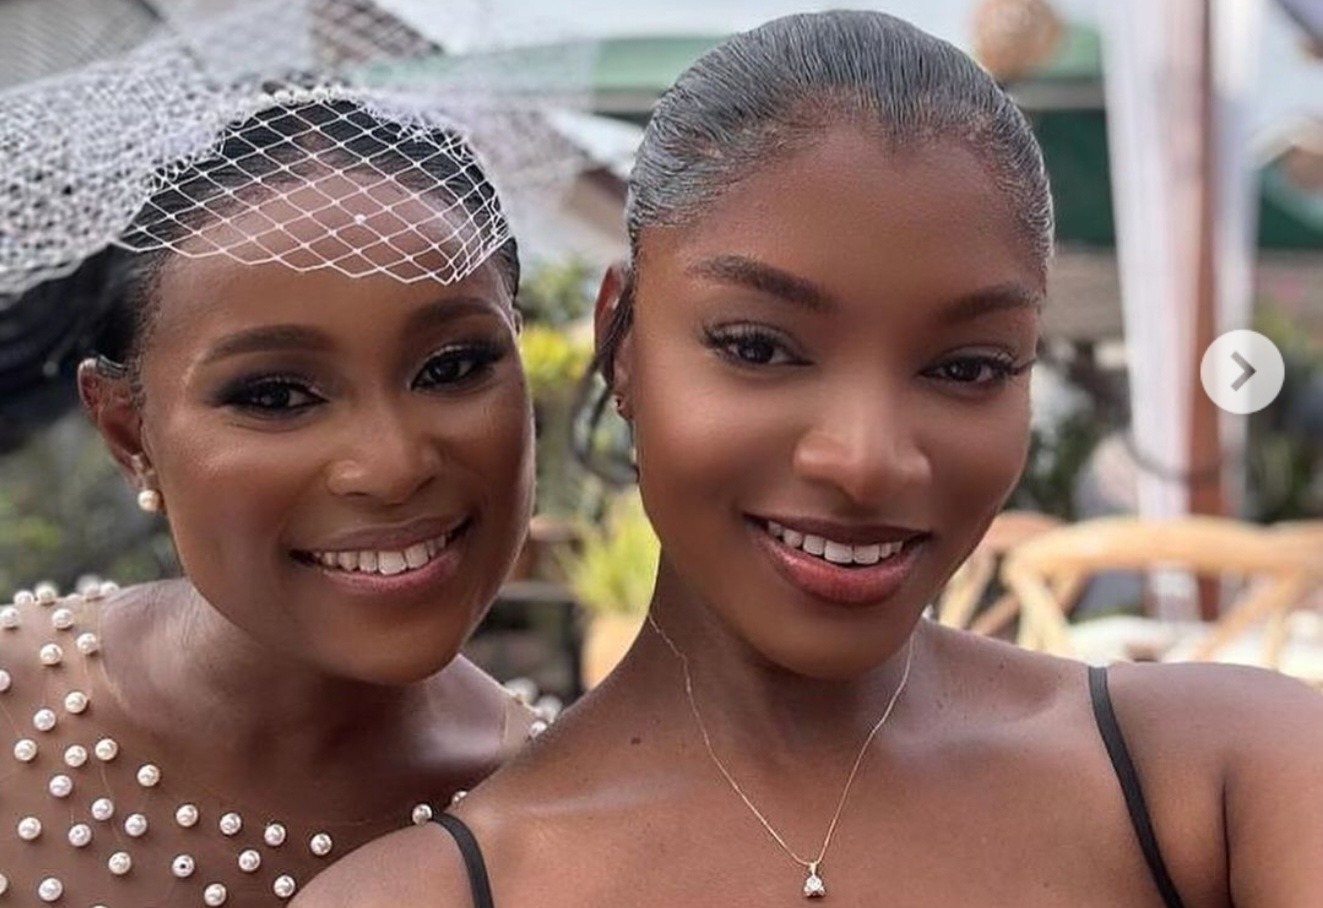 "Runs in the Family" - Berla Mundi Reveals Her Gorgeous Younger Sister